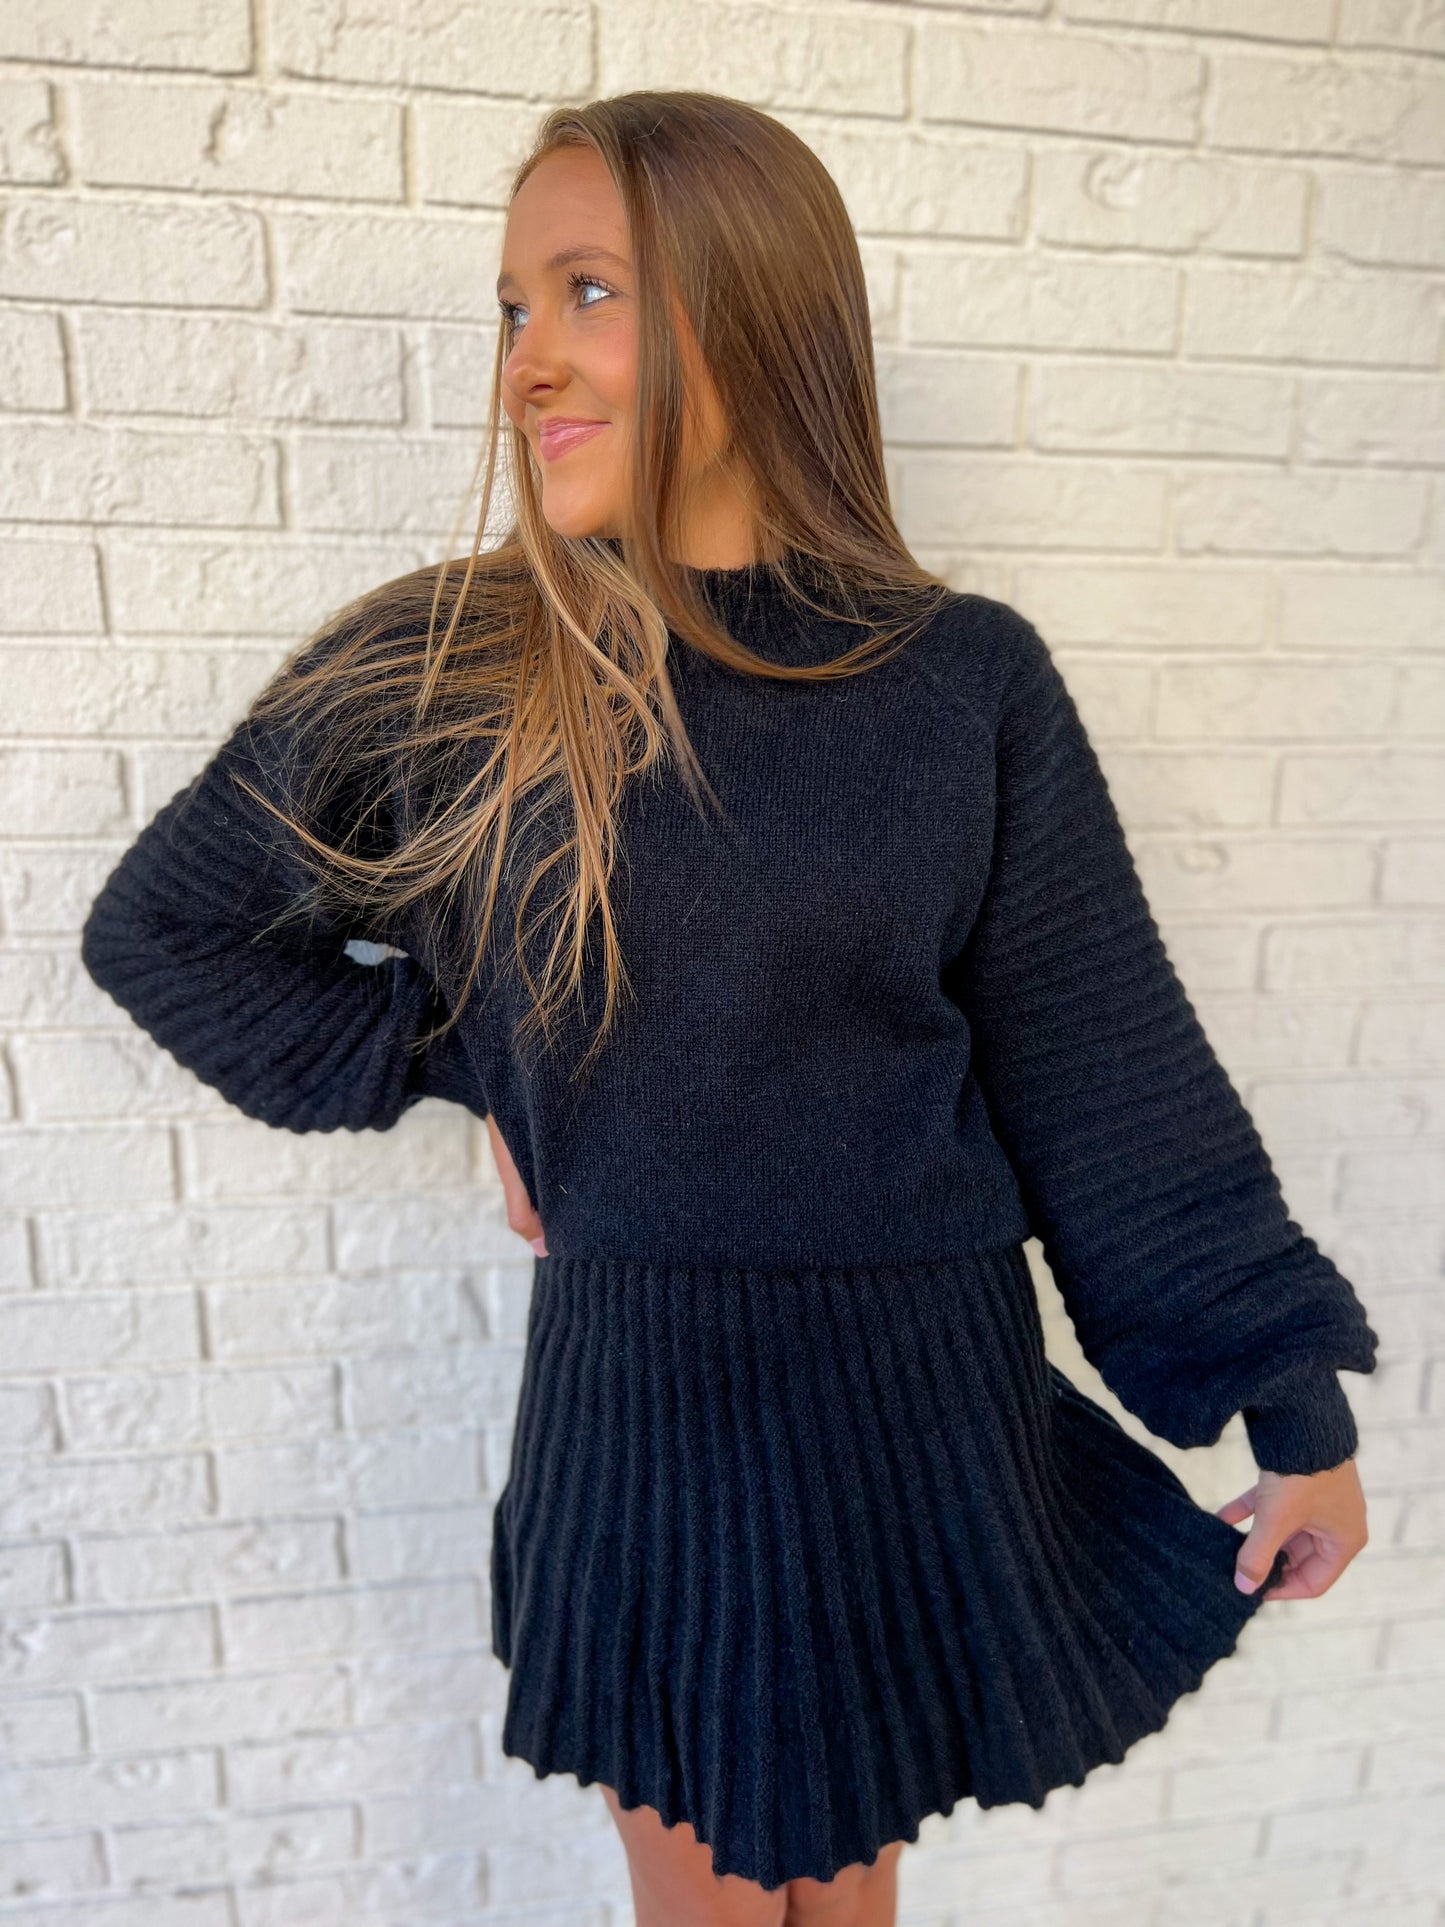 The Brielle Sweater in Black